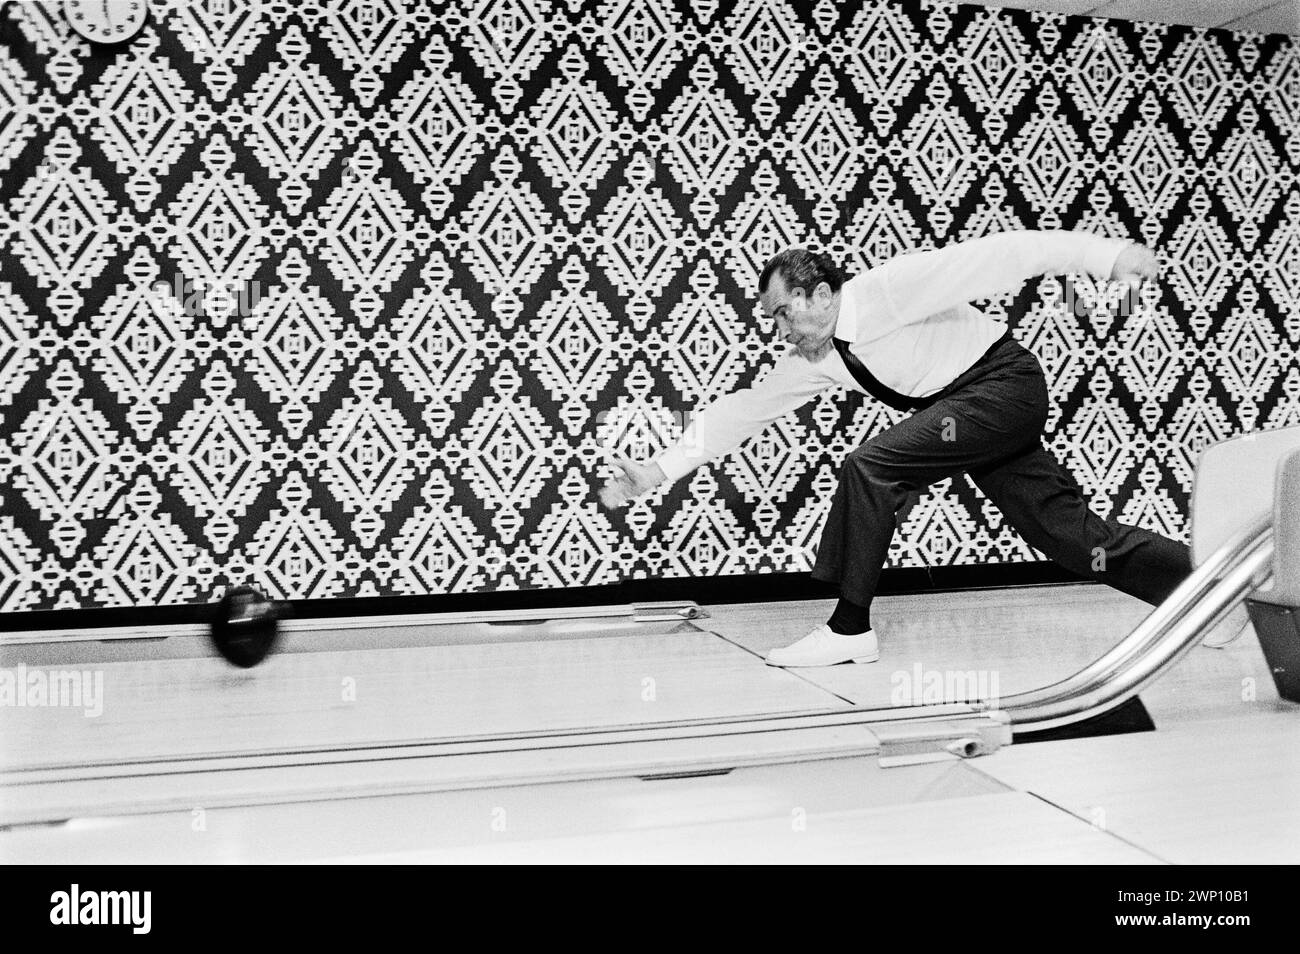 President Richard Nixon Bowling in the White House Bowling Alley.  September 17, 1971. Stock Photo